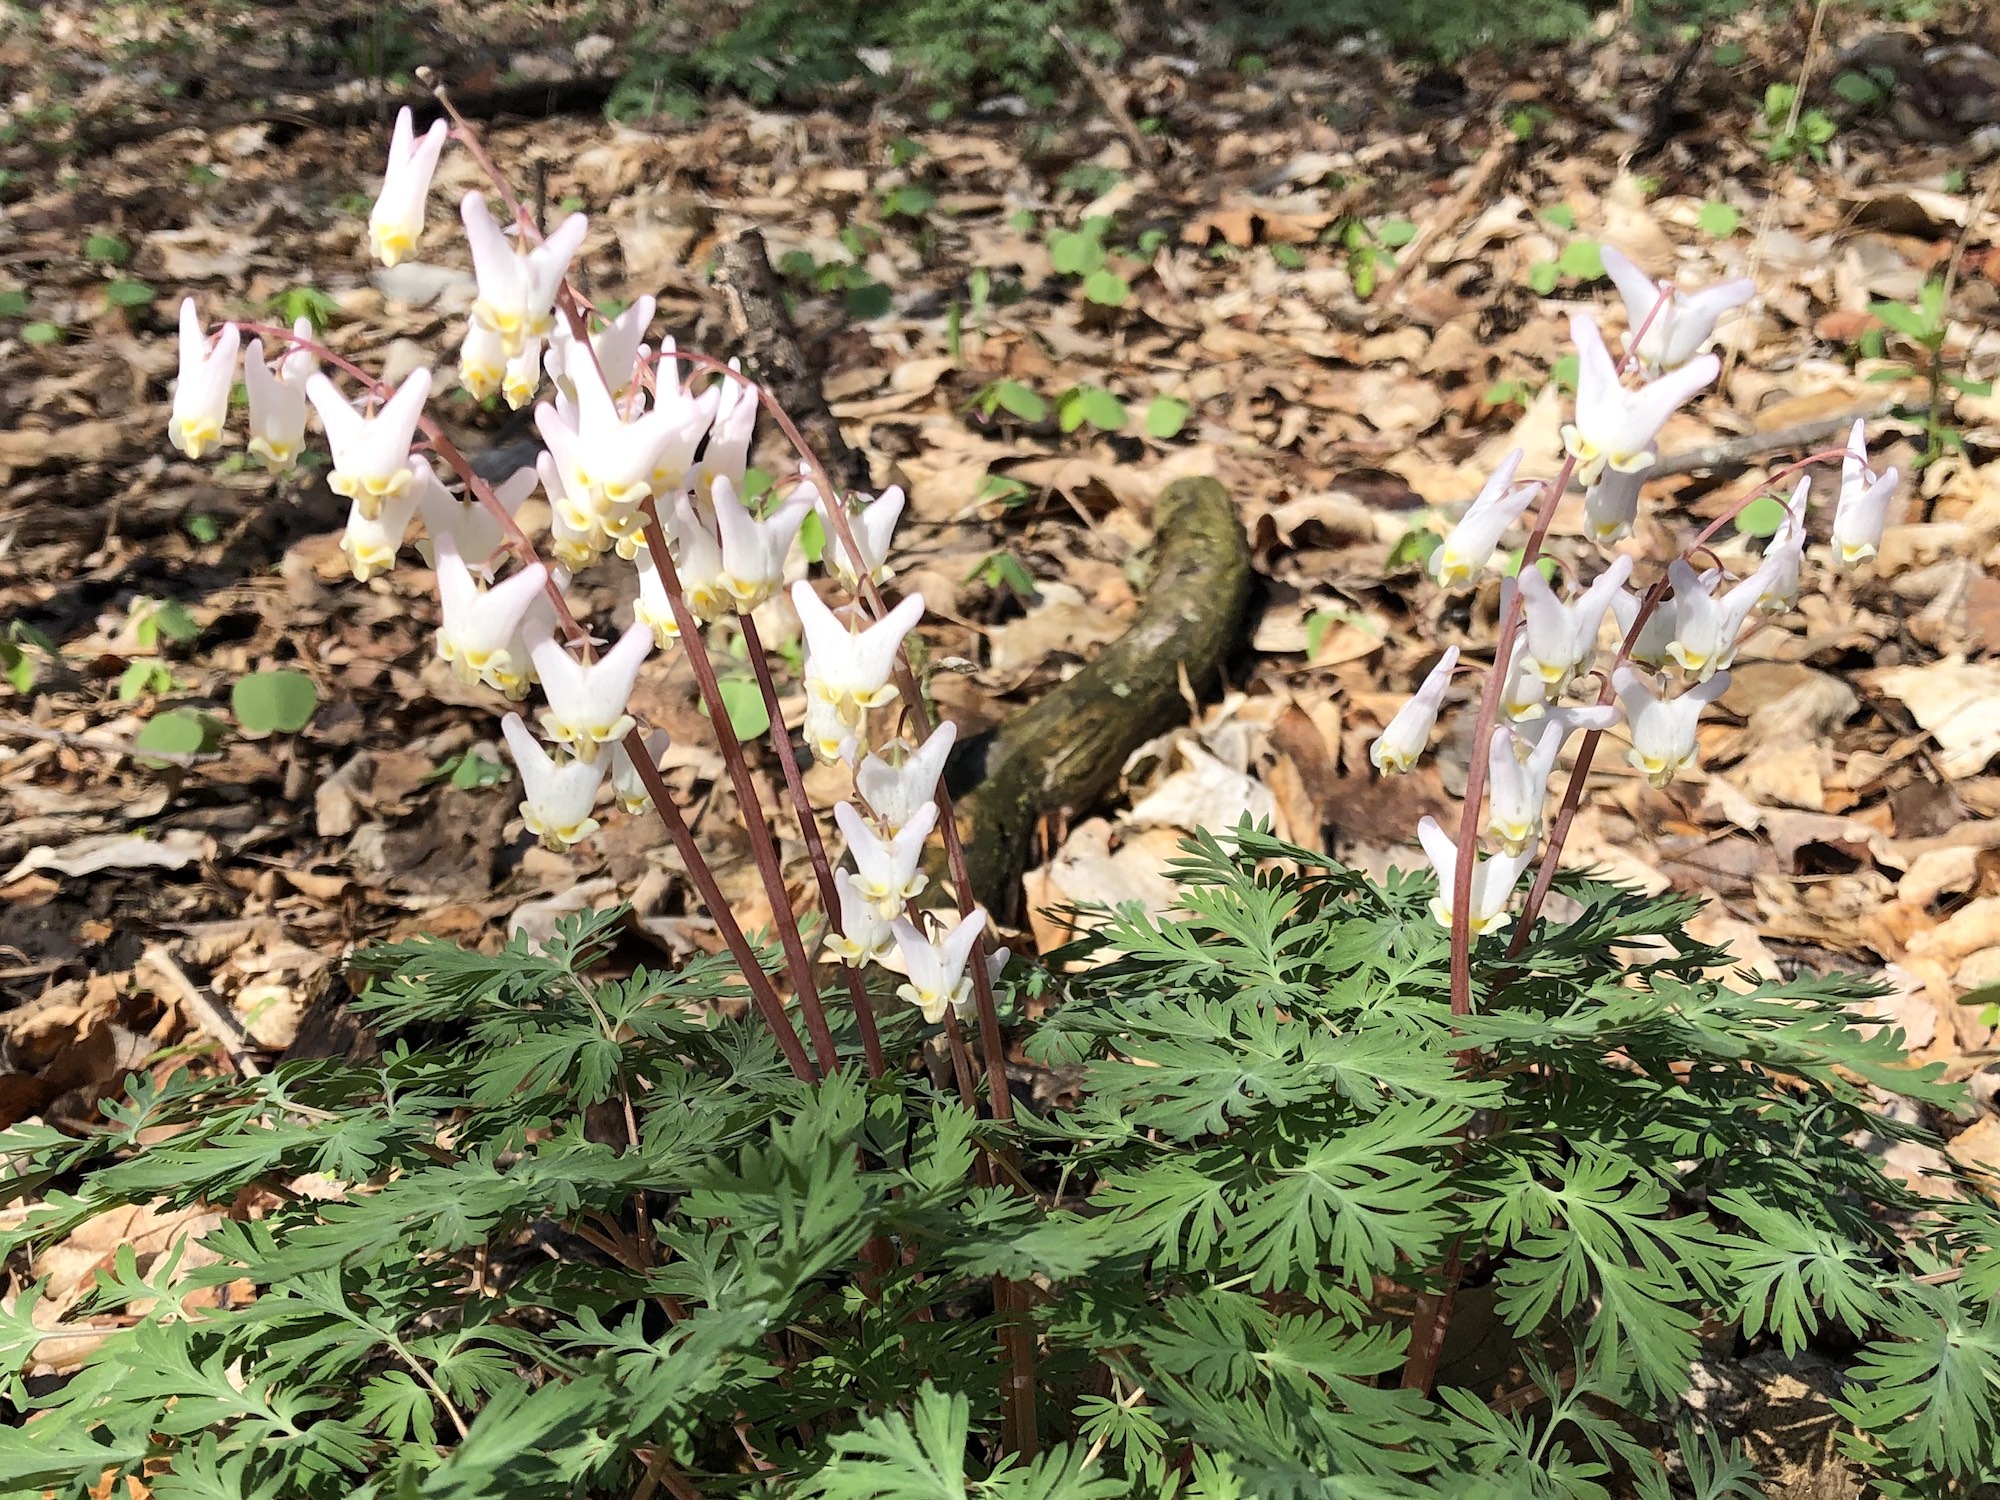 Dutchman's Breeches on April 23, 2019 in woods between Oak Savanna and Marion Dunn.